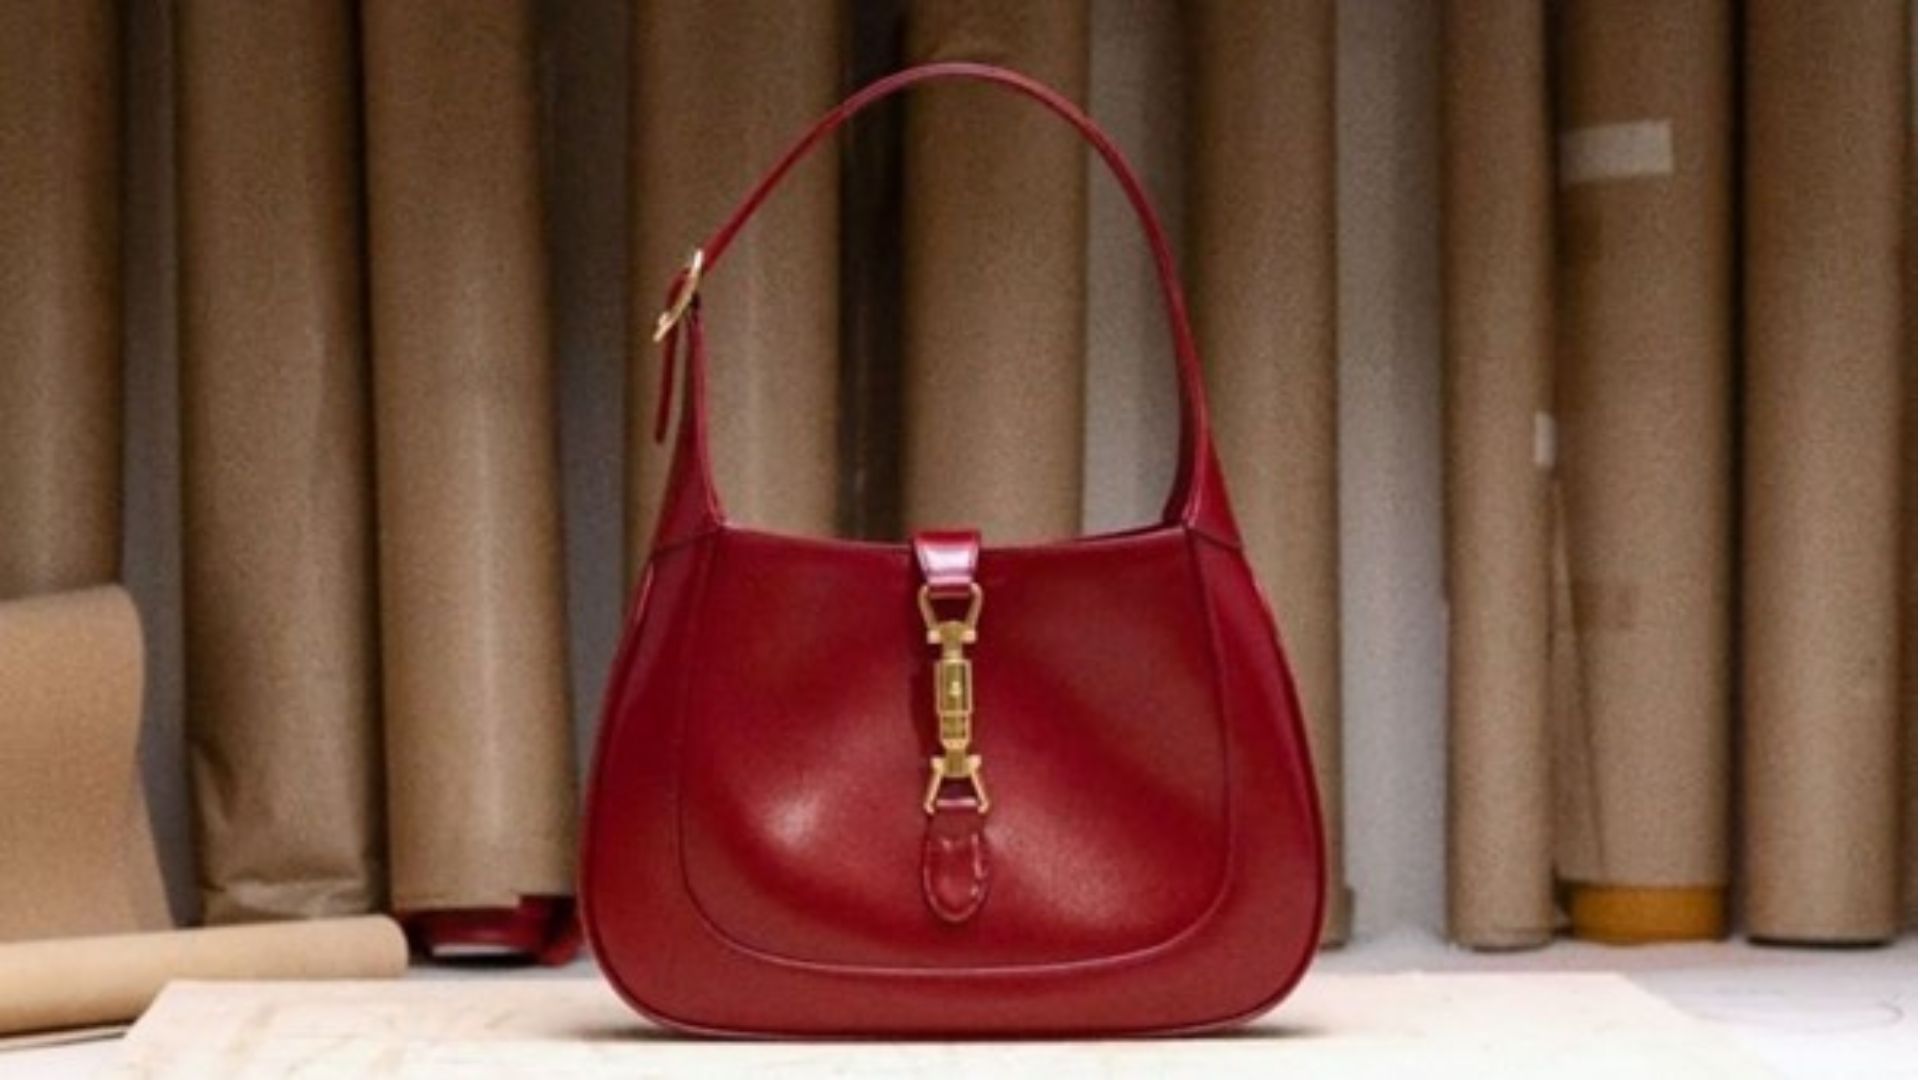 The story behind the world's most famous bags